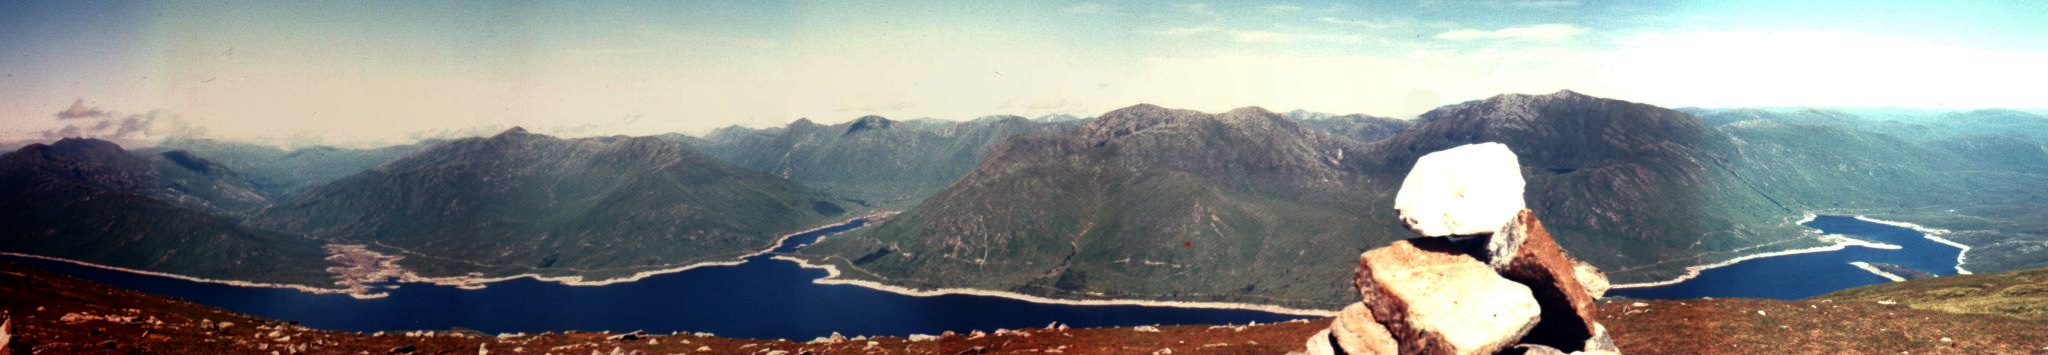 Panorama of the peaks to the north of Loch Quoich from Gairich in Knoydart